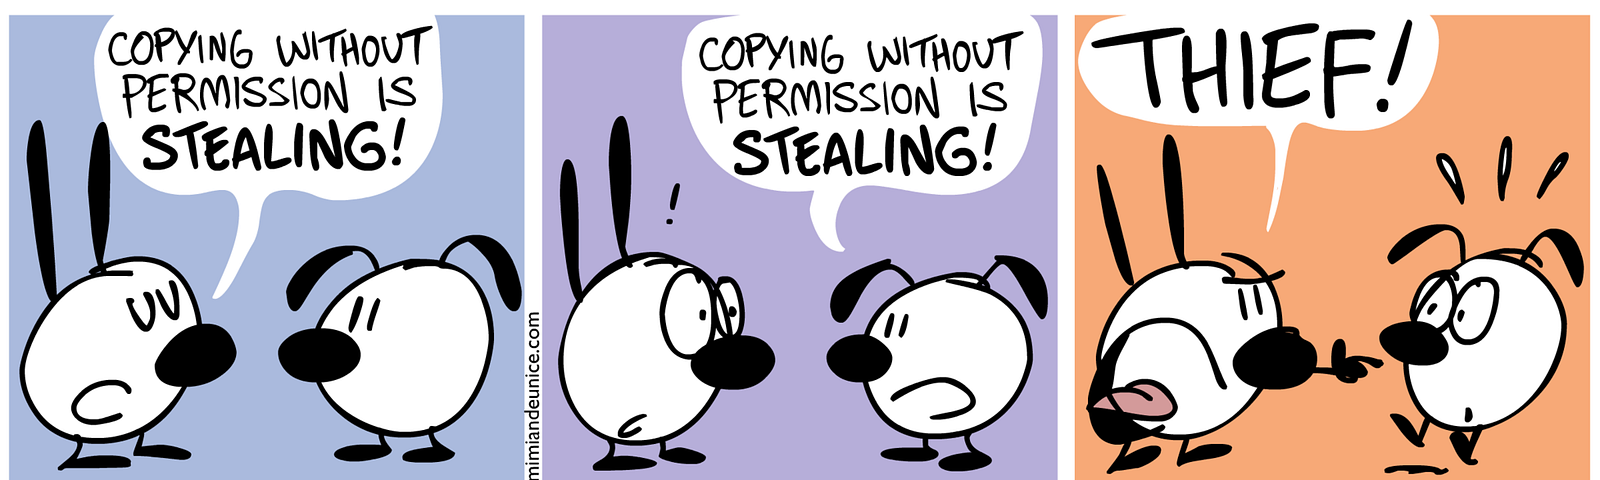 Comic strip where one character says, “Copying without permission is stealing.” The other character repeats, “Copying without permission is stealing.” The first character screams, “THIEF.”